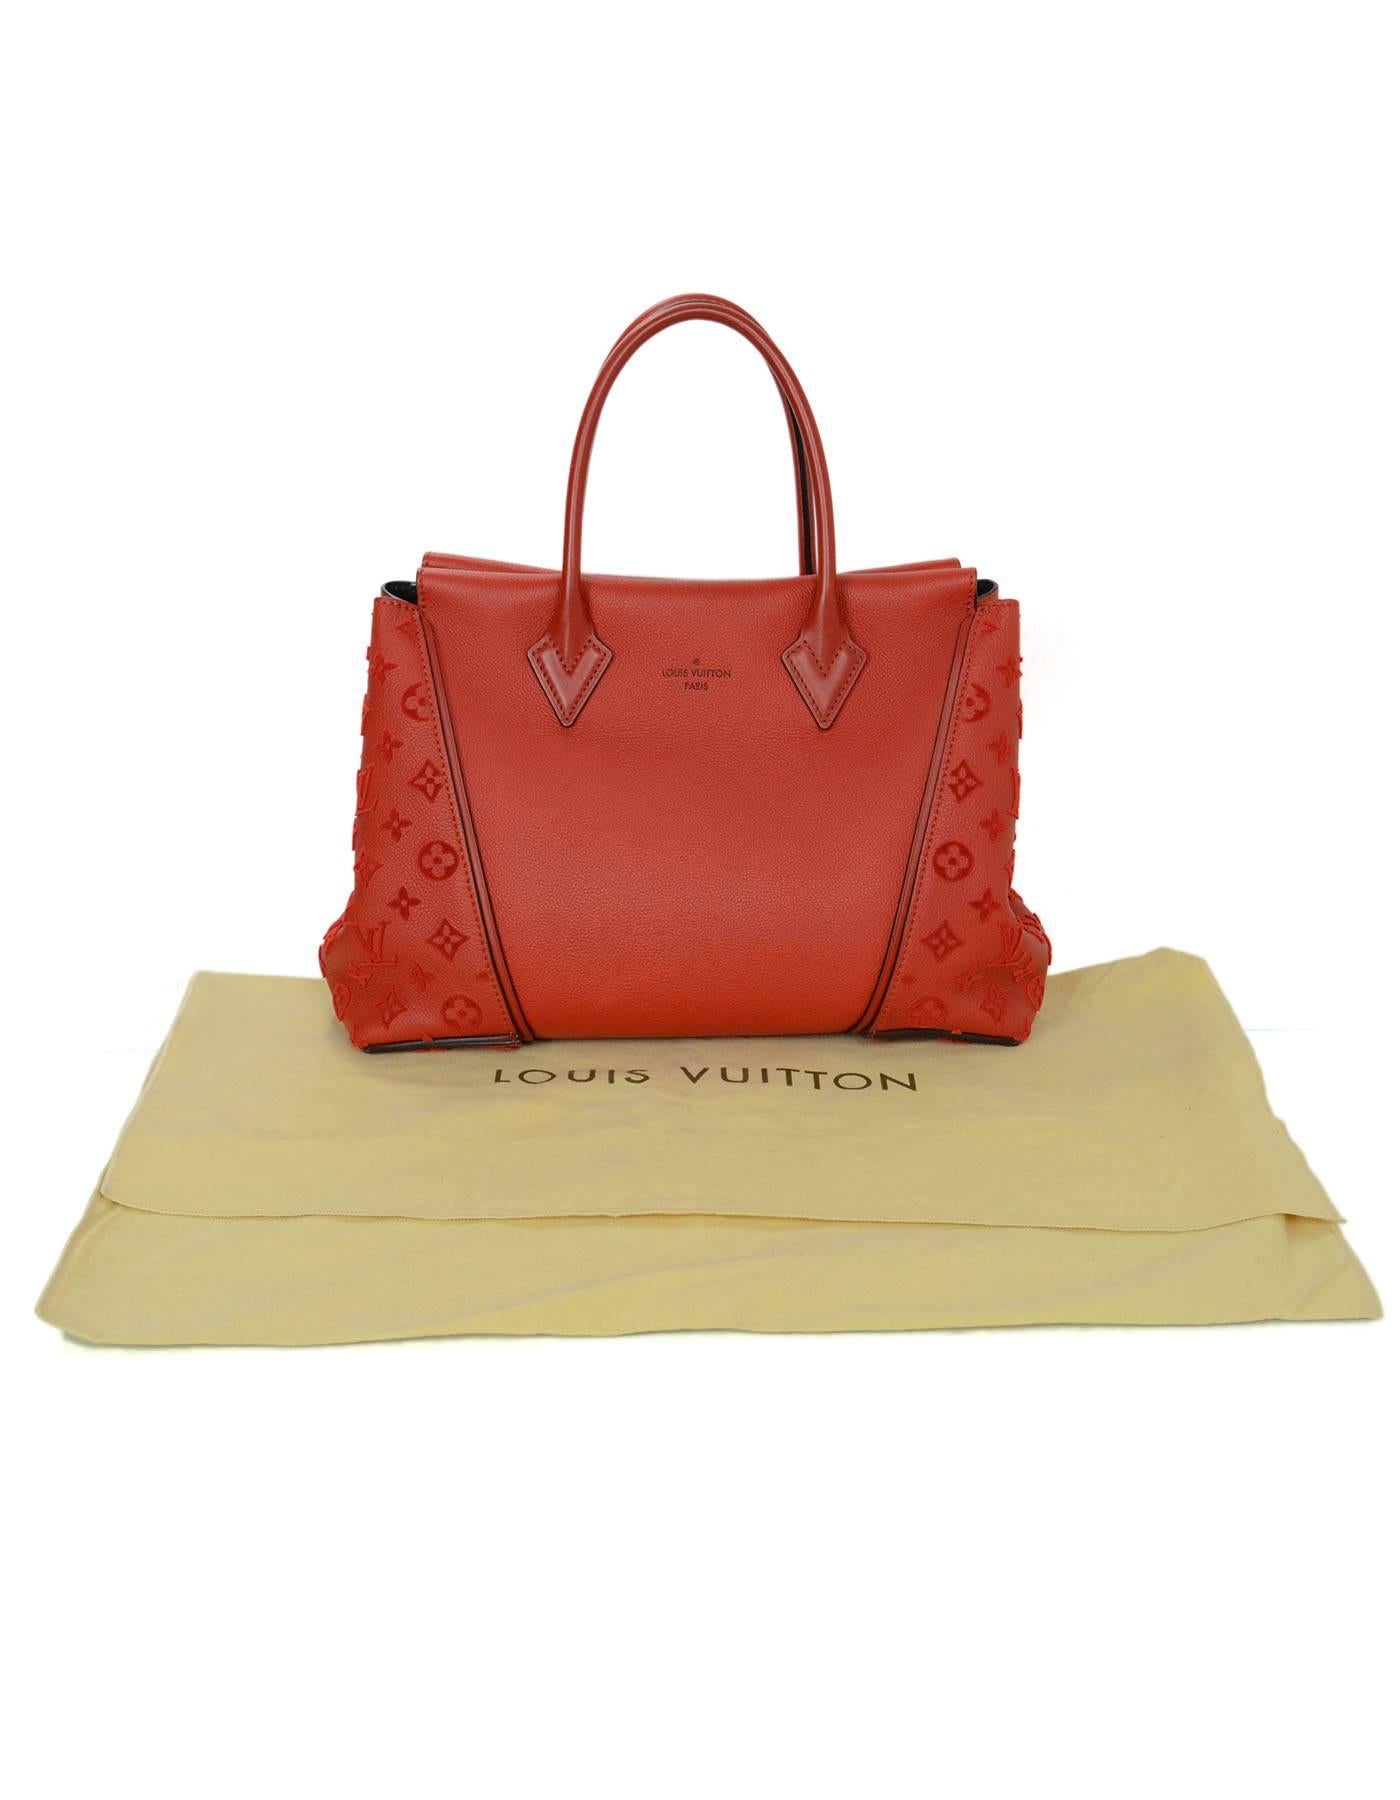 Louis Vuitton Red Leather Velours W PM Tote Bag rt. $4, 850 6